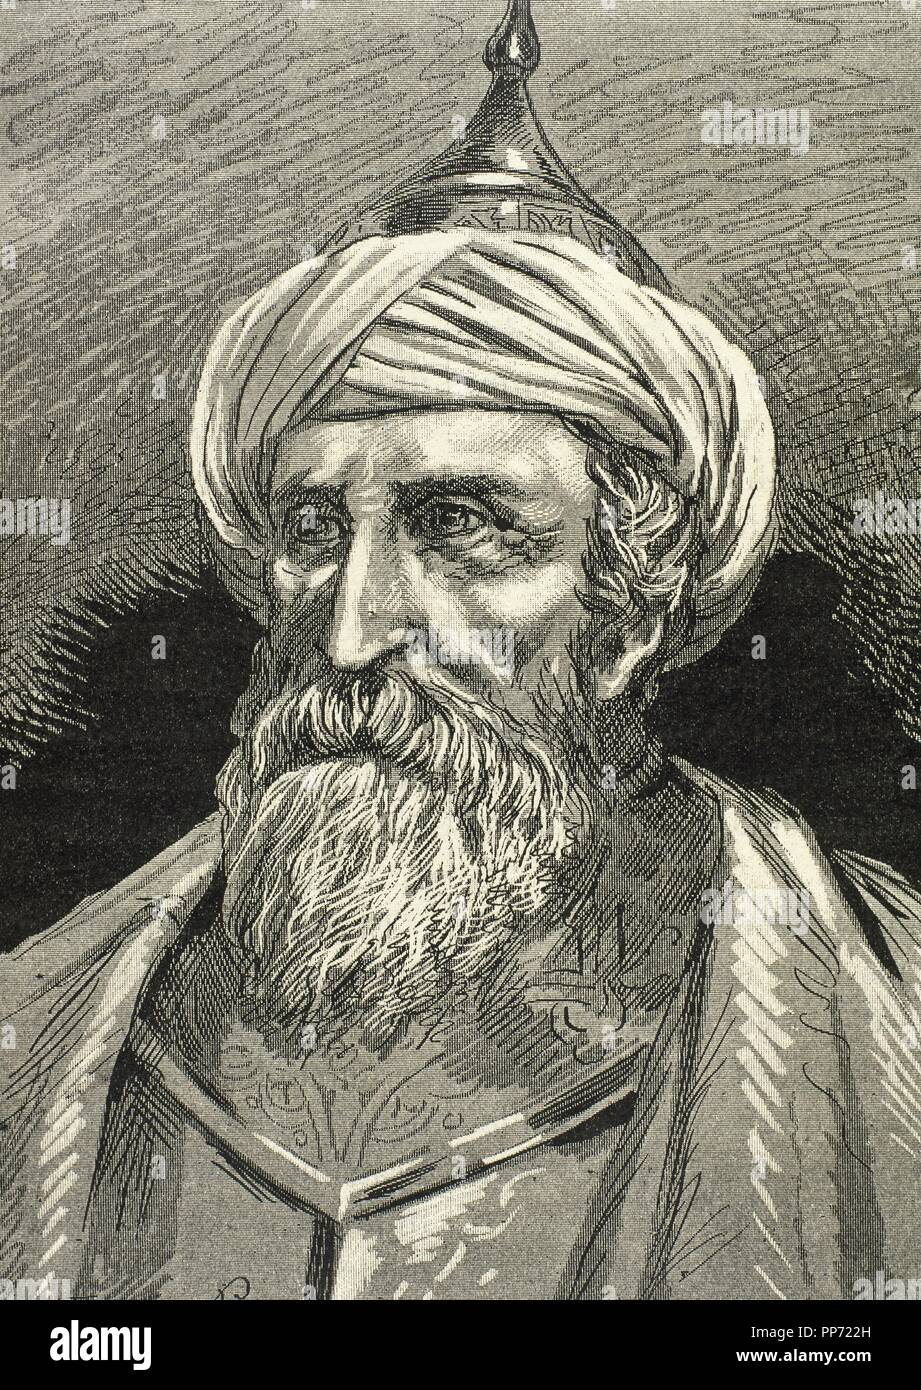 Muezzinzade Ali Pasha, also known as Sofu Ali Pasha, Sufi Ali Pasha or Meyzinoglu Ali Pasha (d.1571). Ottoman statesman and naval officer. He was Kapudan Pasha (Grand Admiral) in command of the Turkish fleet at the naval Battle of Lepanto, where he was killed in action. Portrait. Engraving. Stock Photo